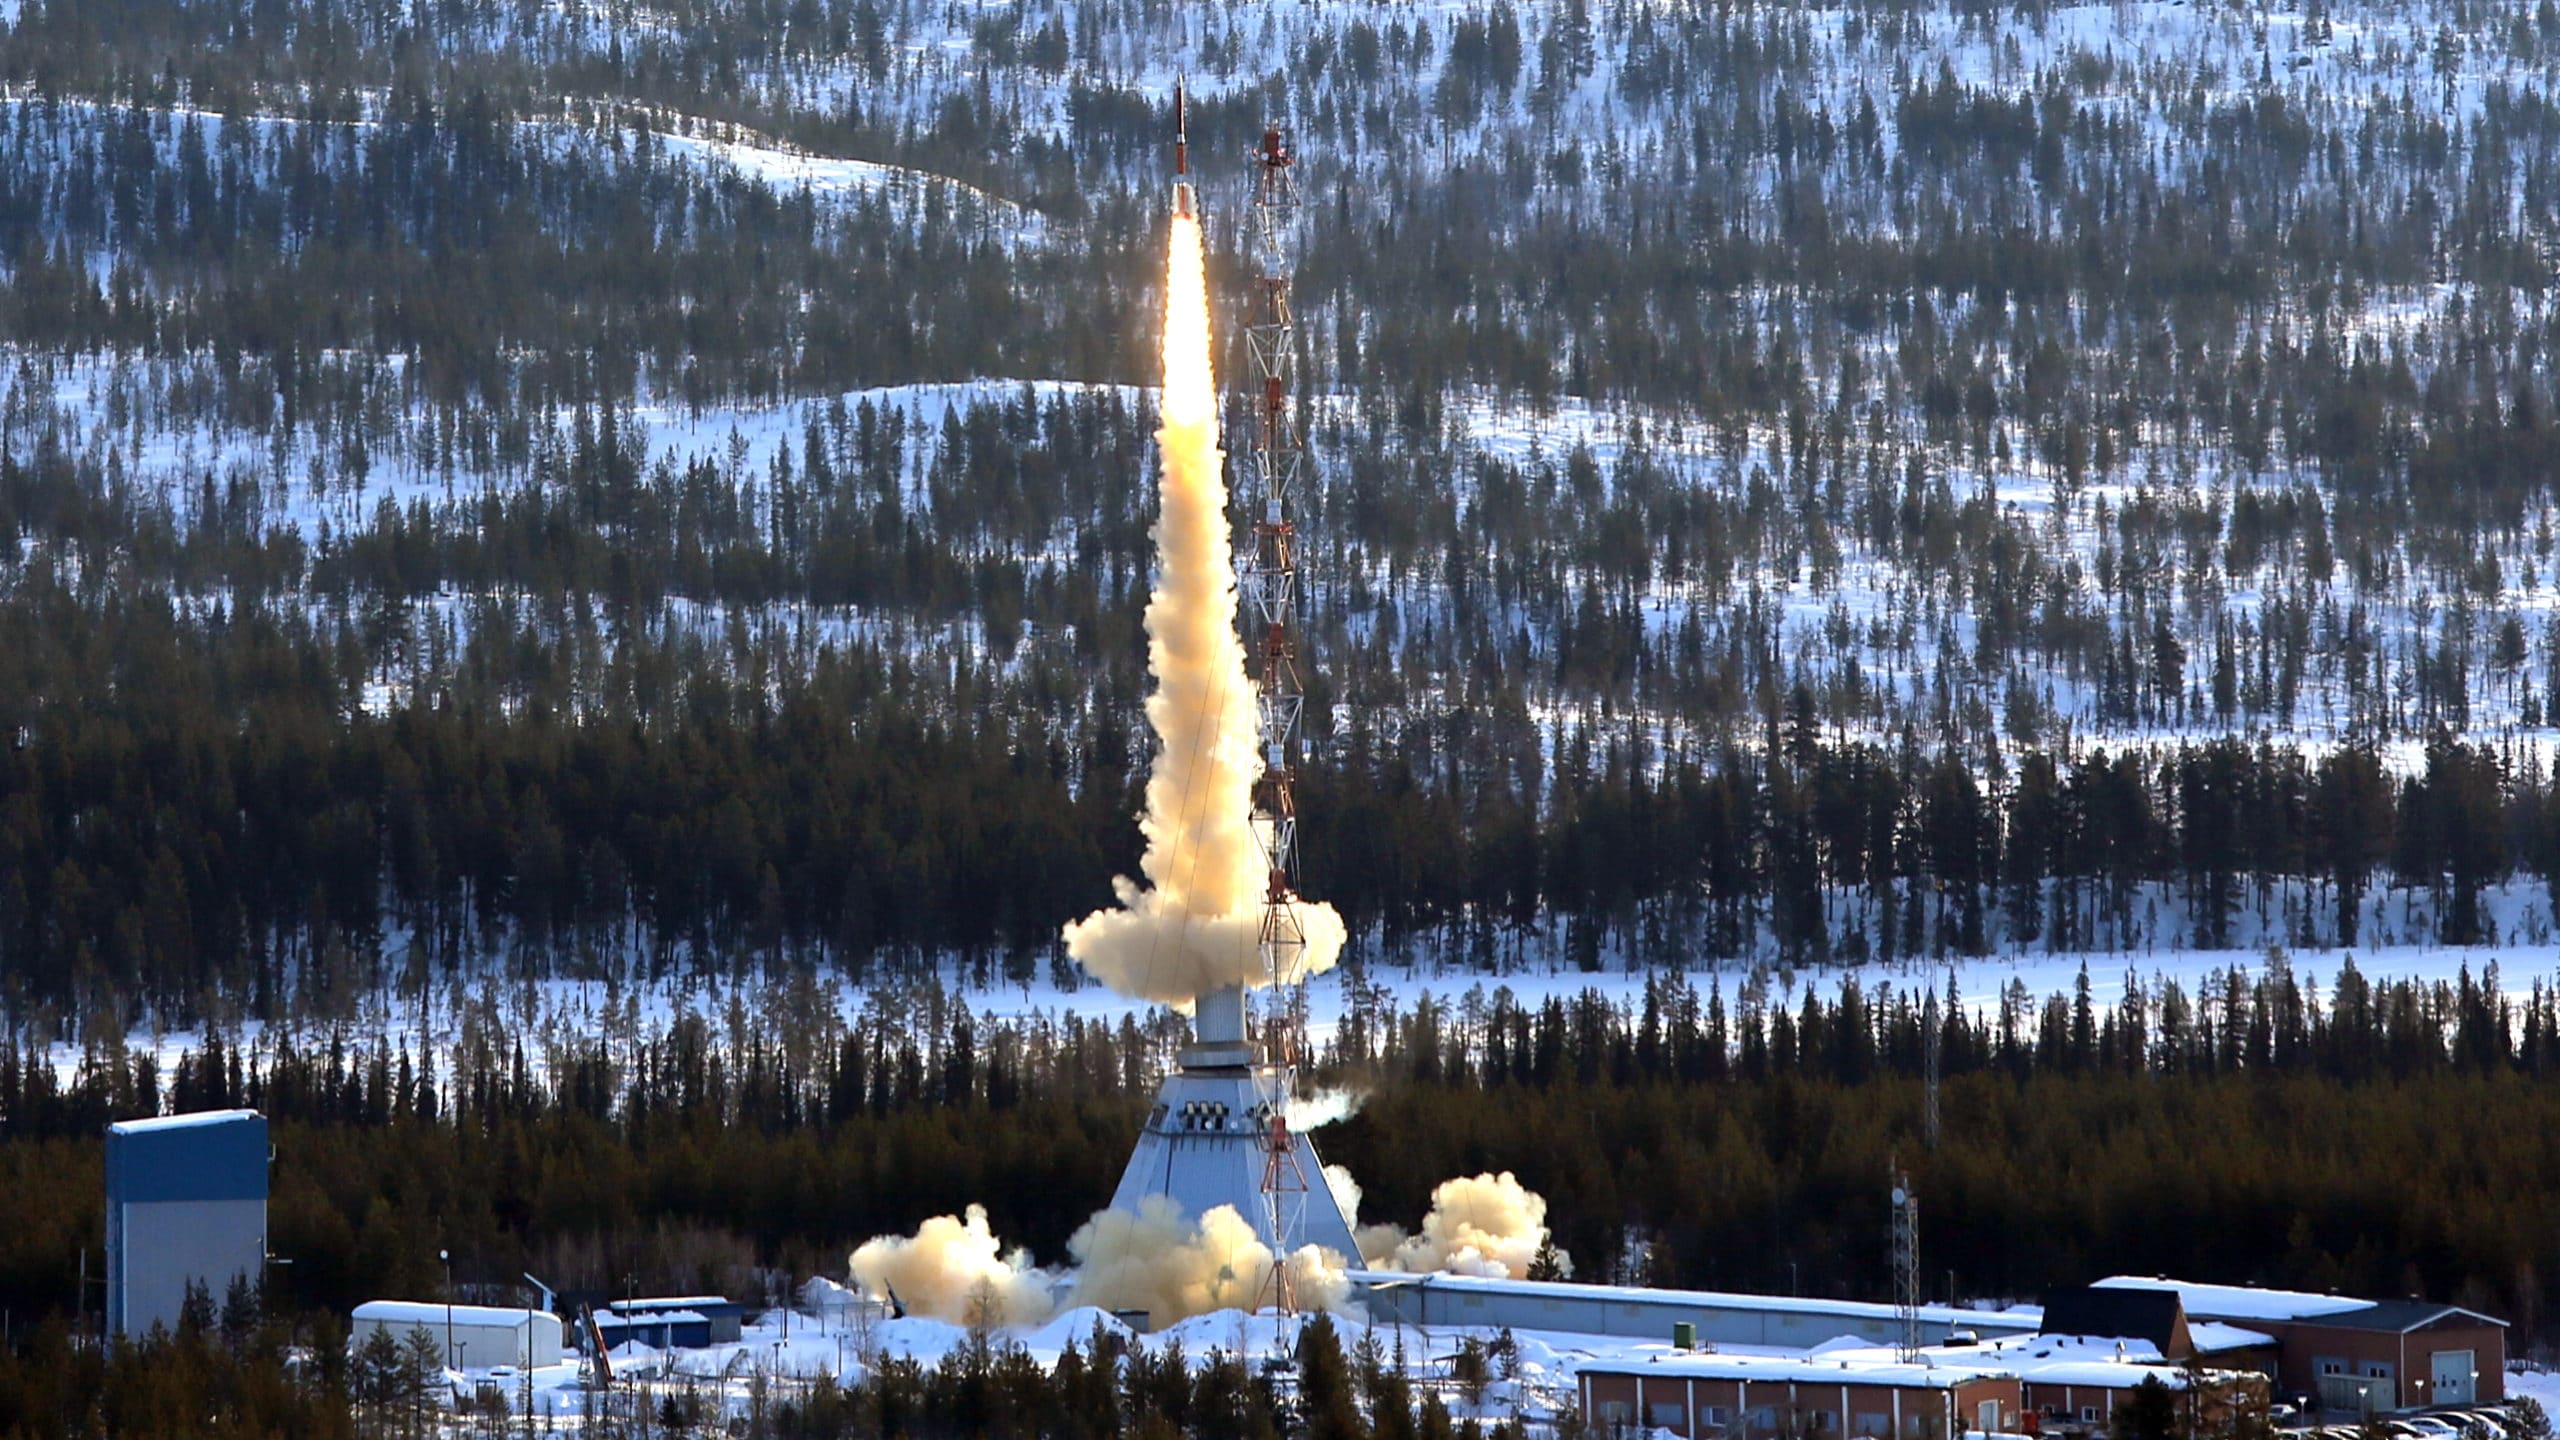 Launch of rocket from ESRANGE space center in Kiruna, Sweden, surrounded by trees